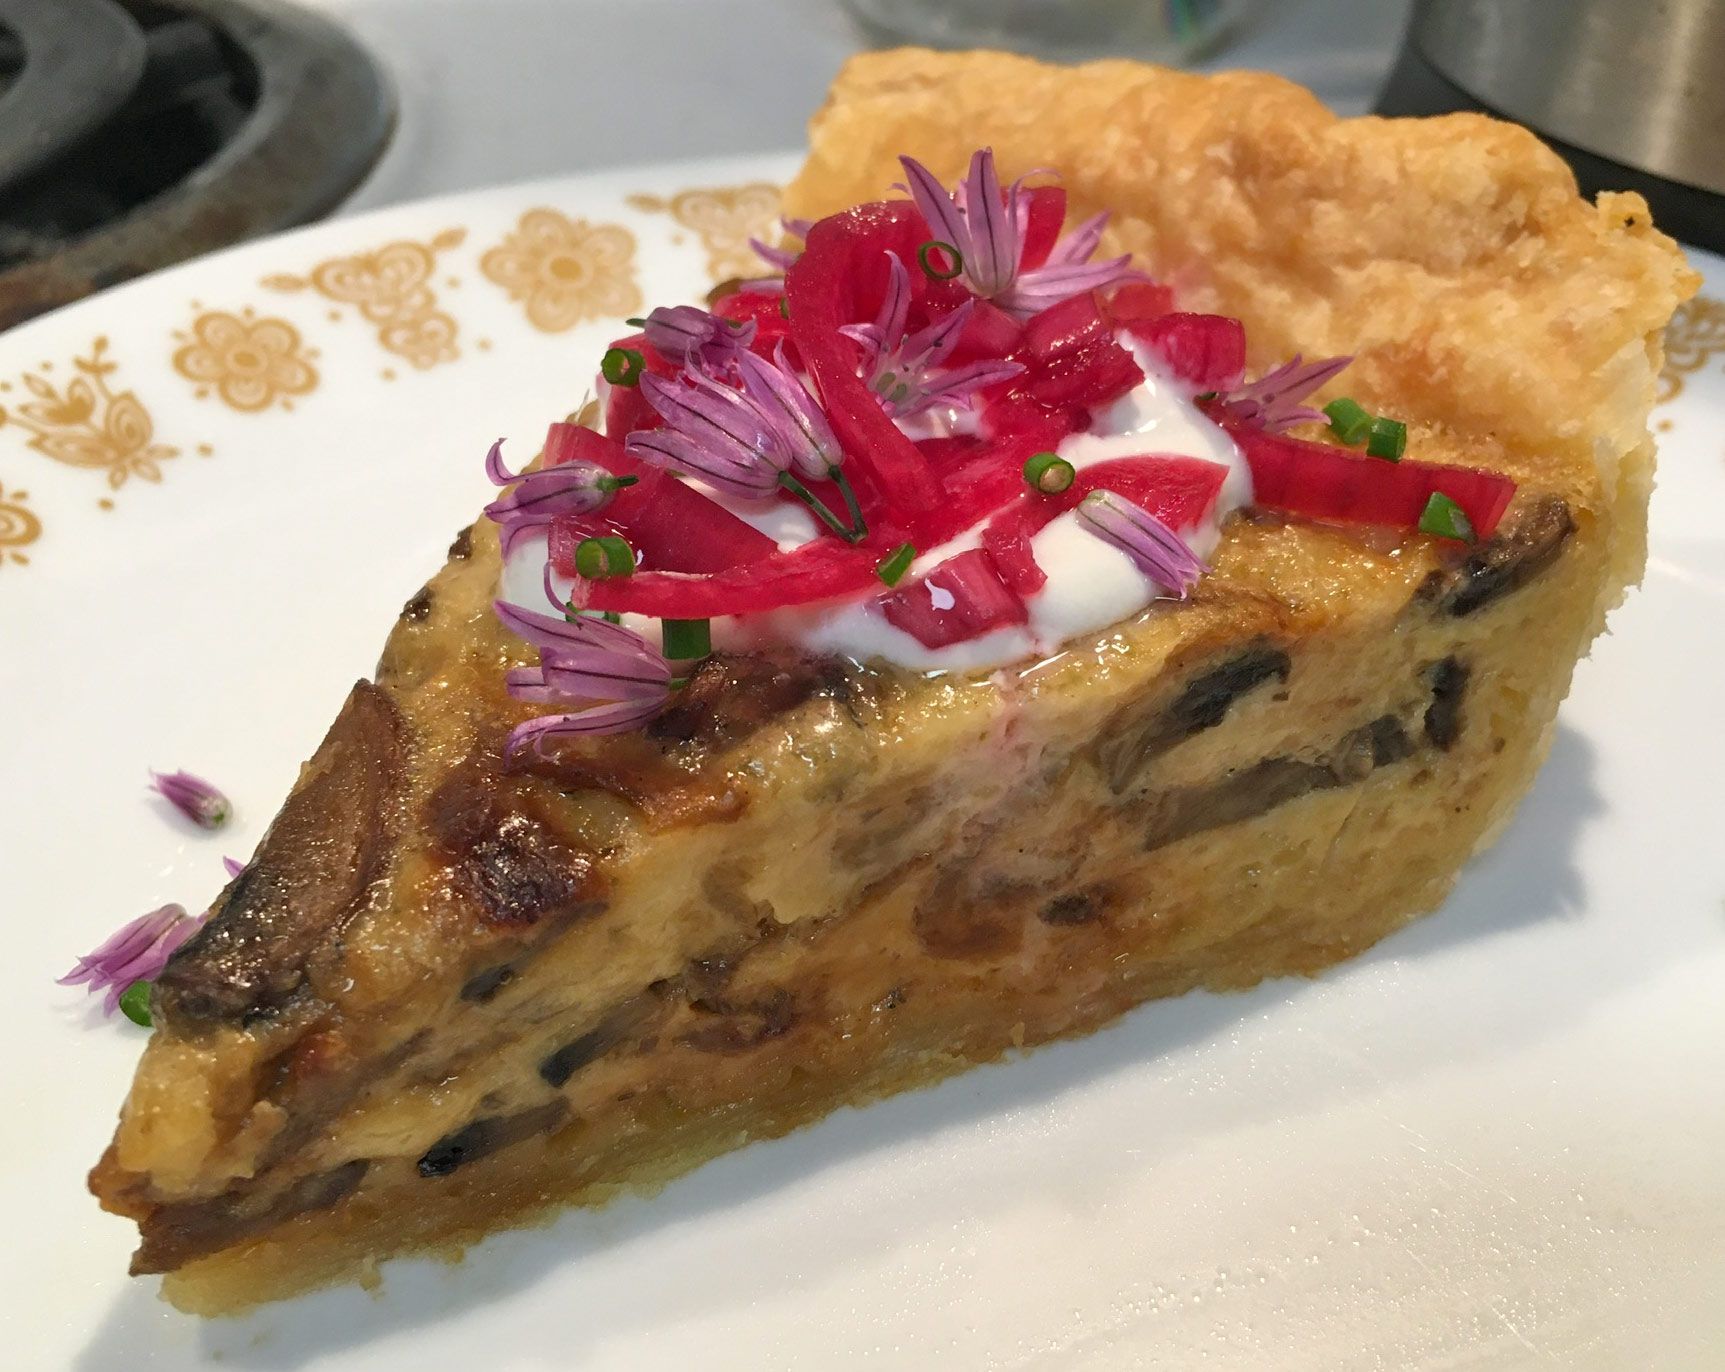 A slice of quiche is on a plate, topped with a cream sauce, bright pink onions, and small purple blossoms.